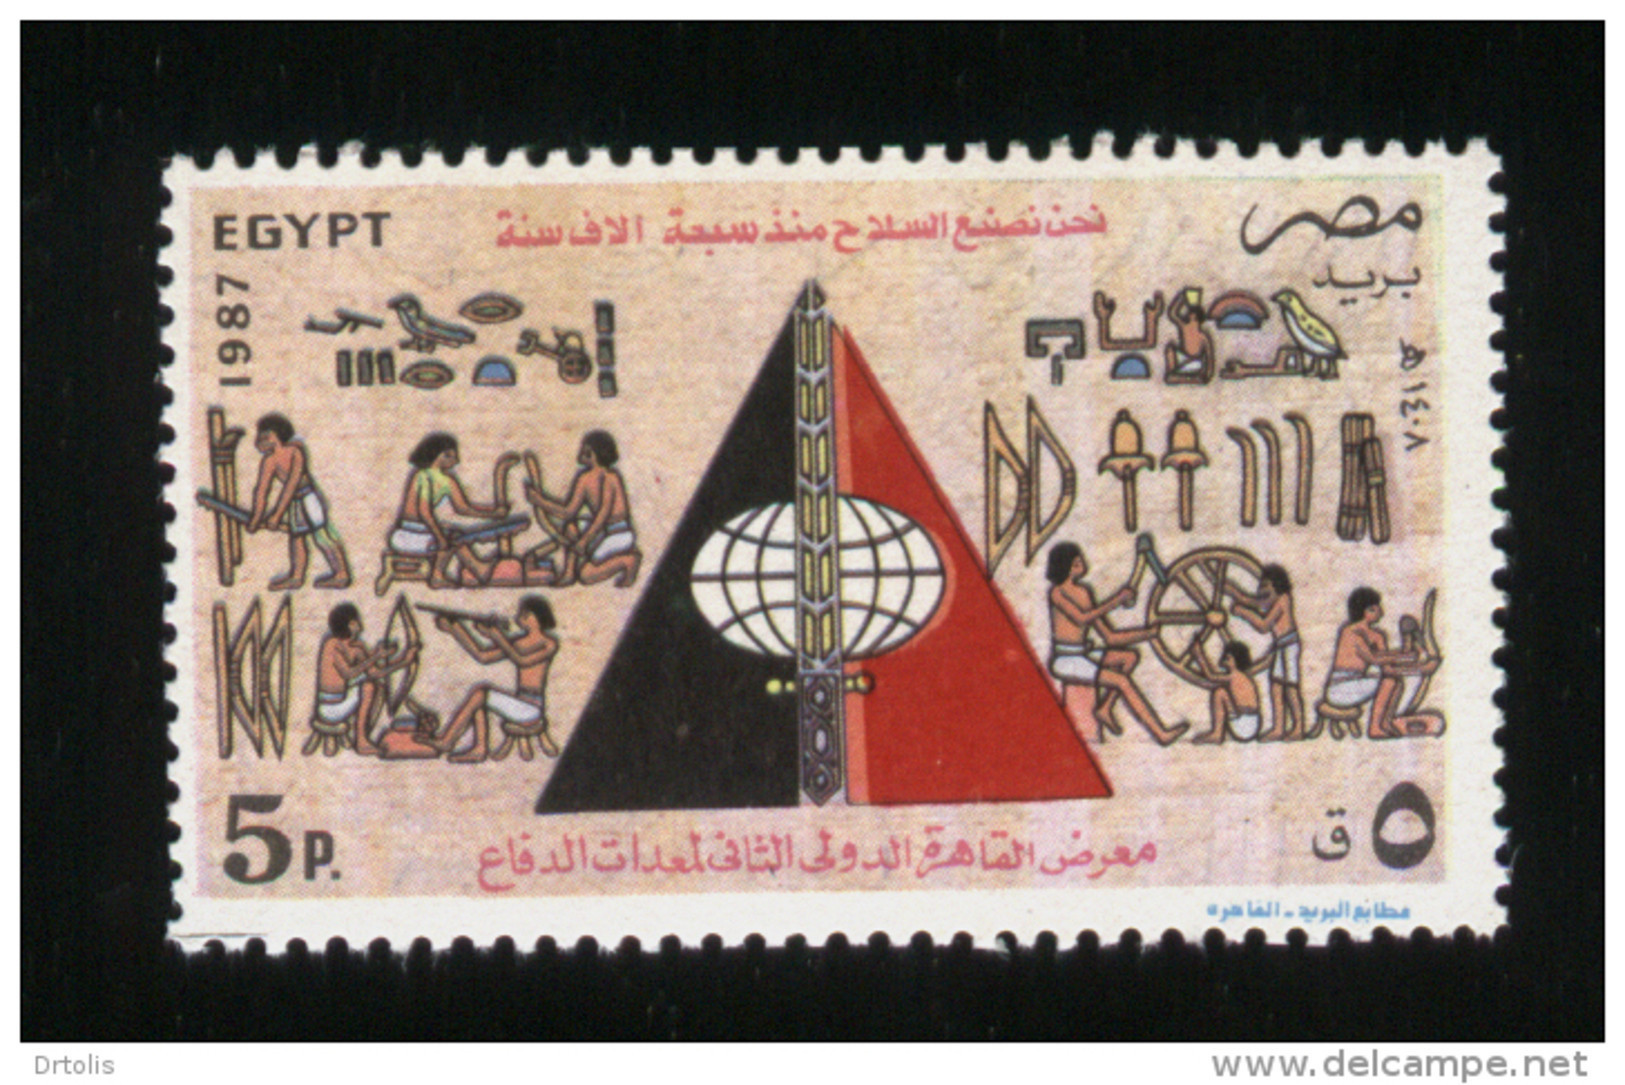 EGYPT / 1987 / INTL. DEFENCE EQUIPMENT EXHIBITION / ANCIENT EGYPTIANS MAKING WEAPONS / MNH / VF - Nuevos